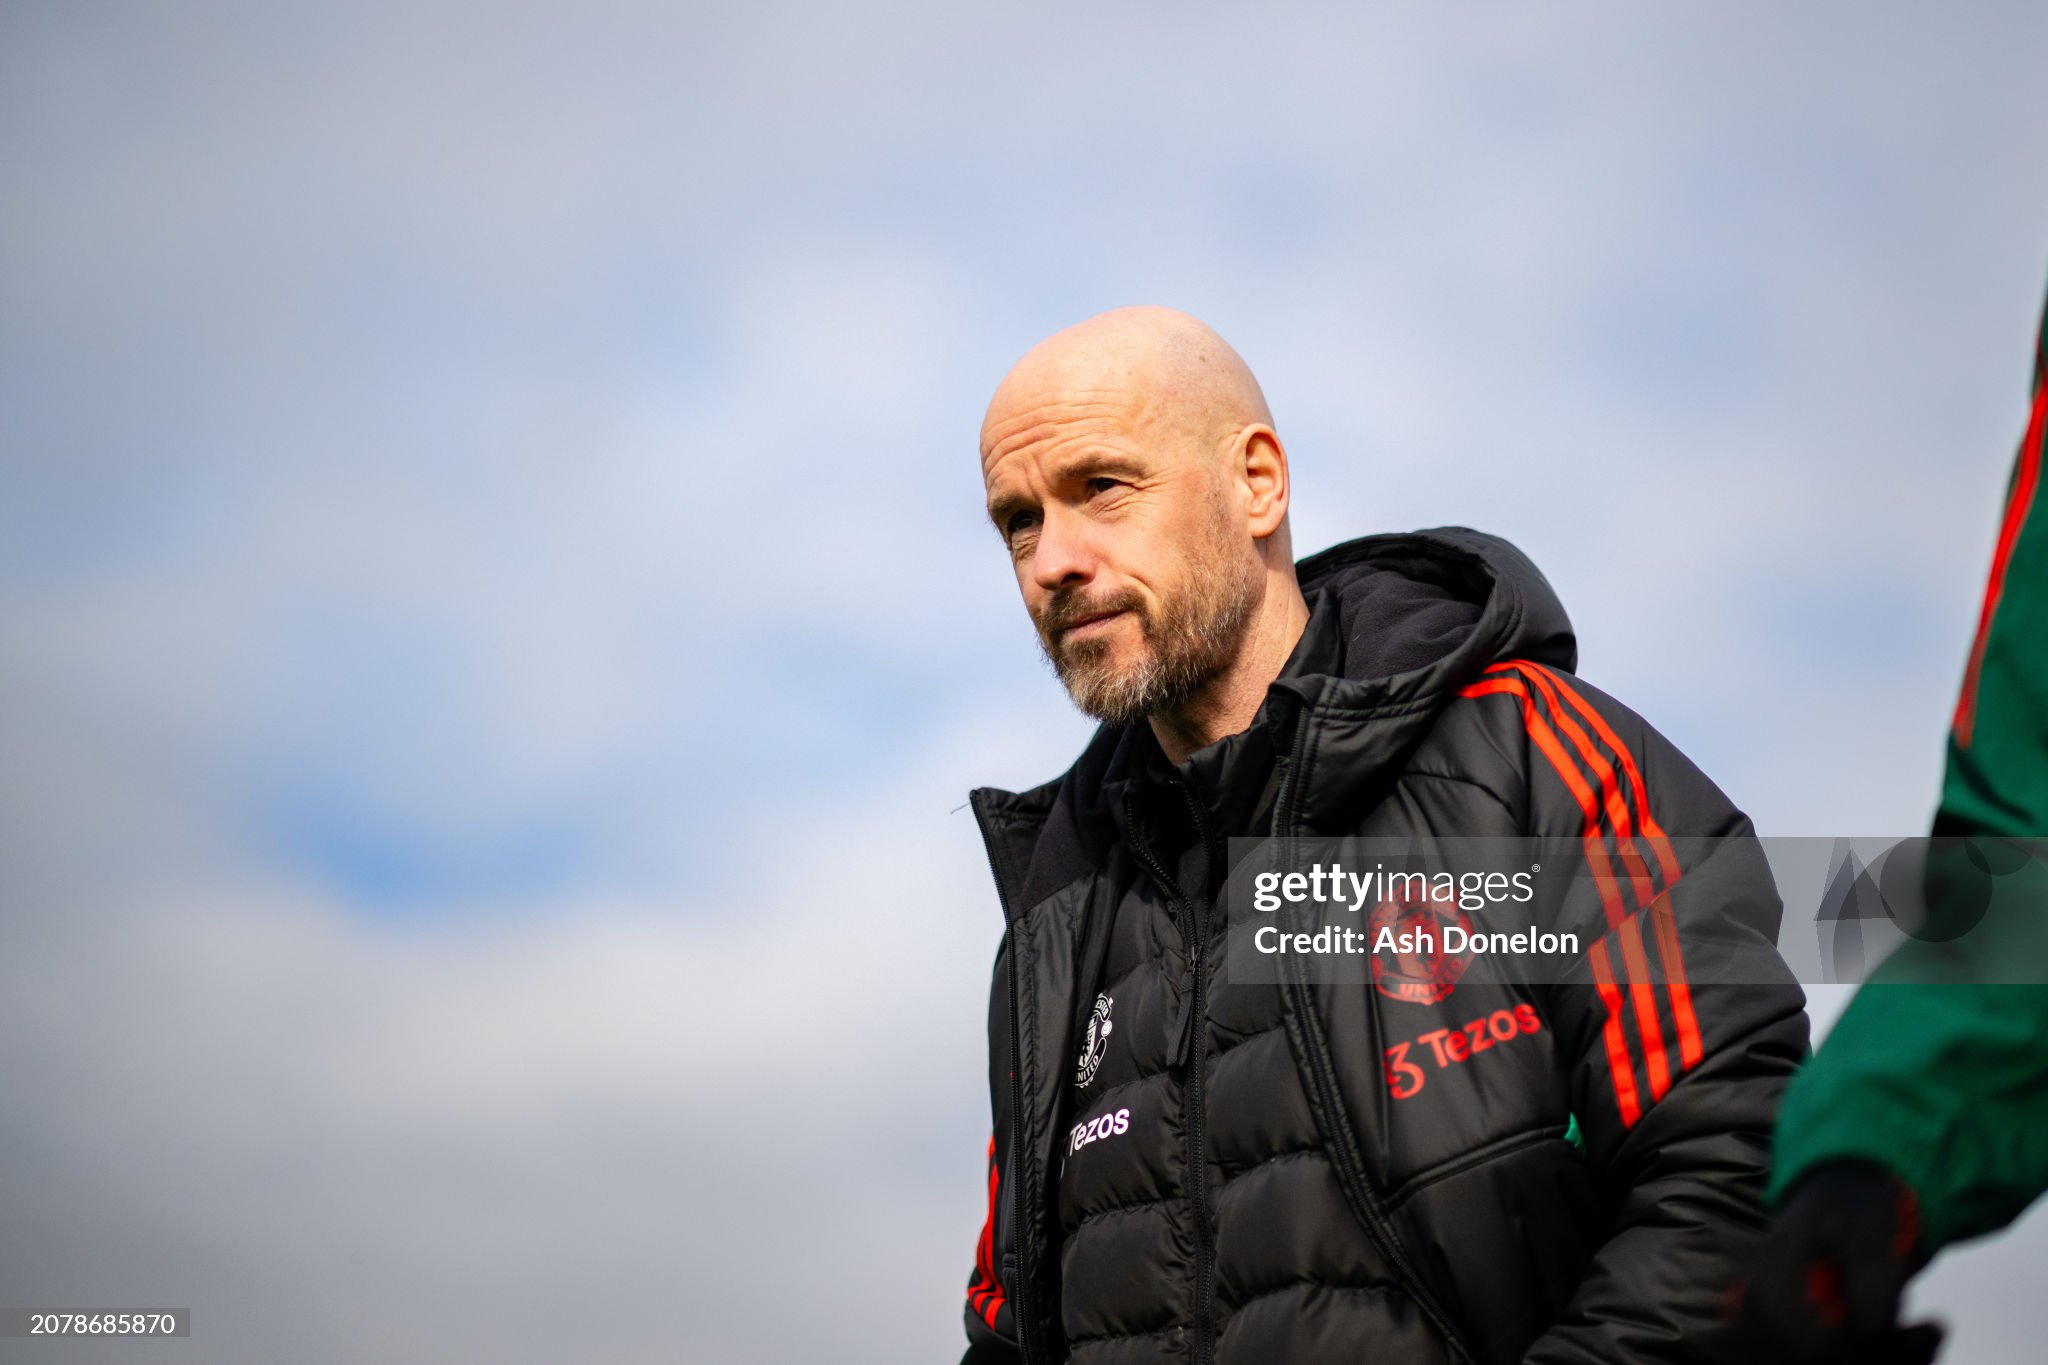 I see no reason for Ten Hag to leave Manchester United at the end of the season